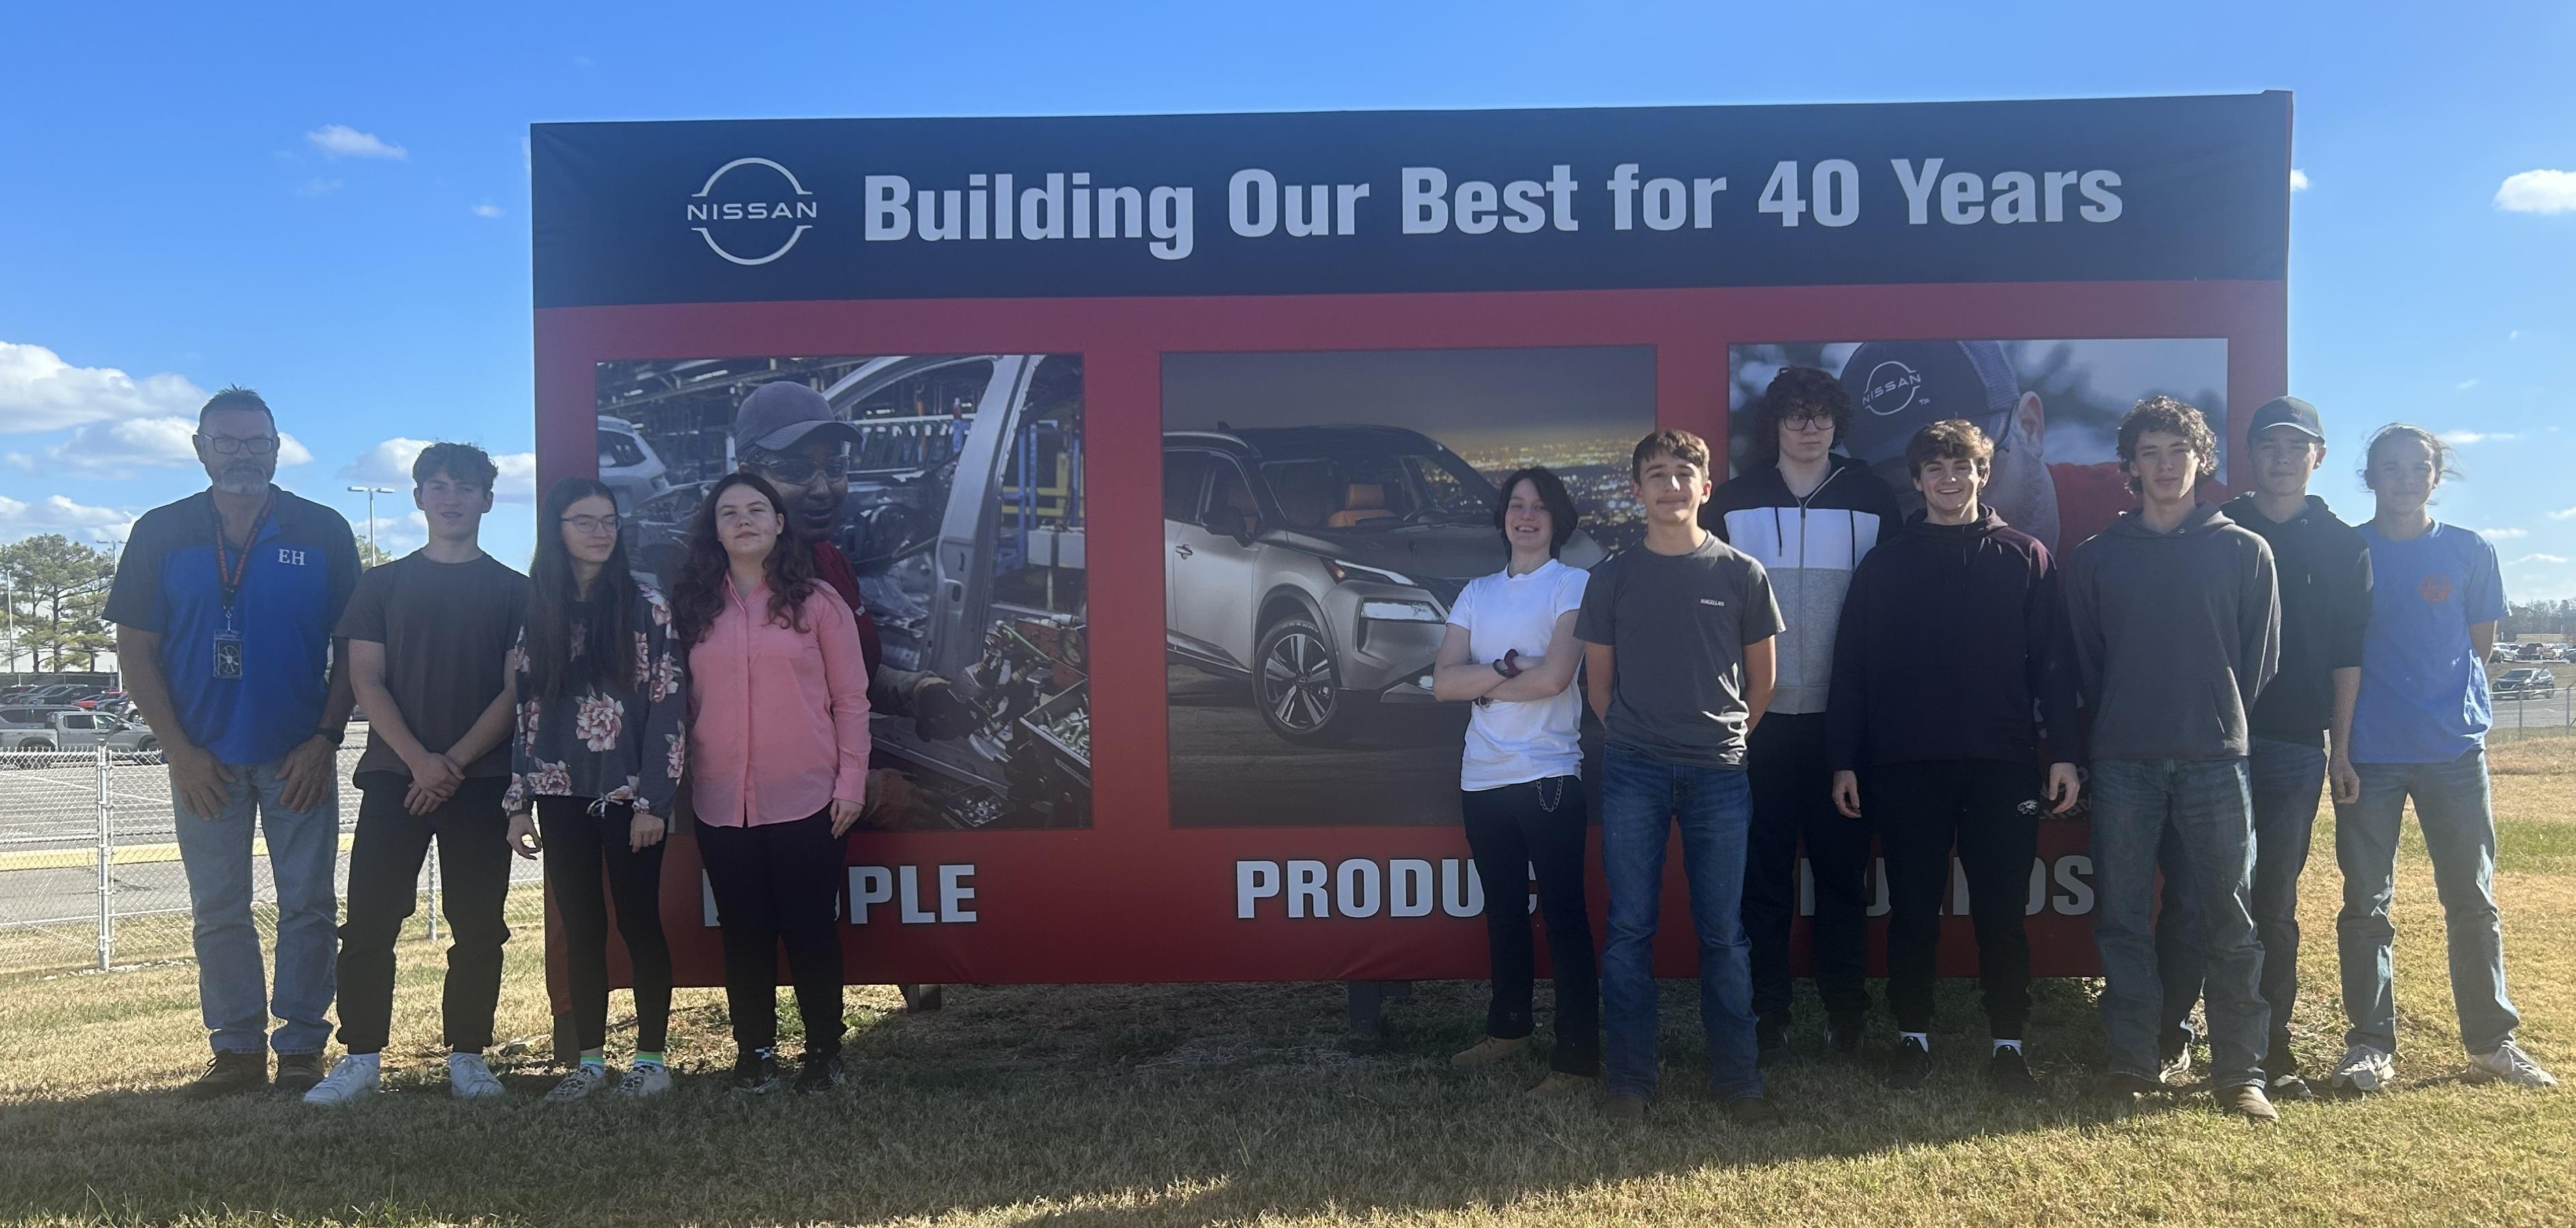 Building Trades Students posing for a group picture in front of a sign